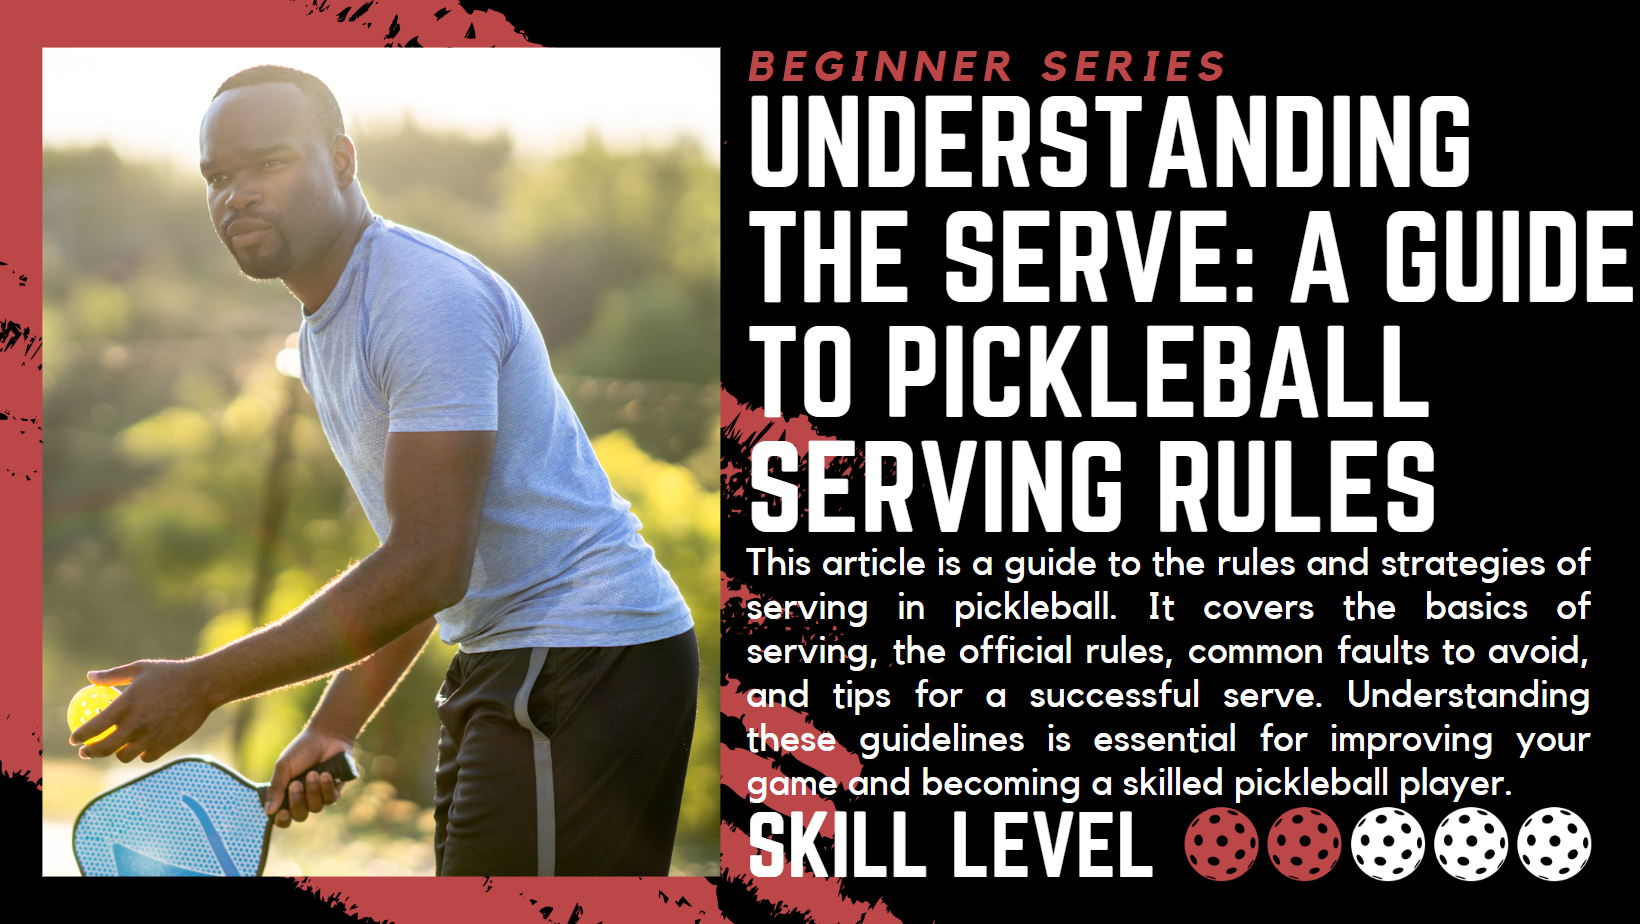 Understanding the Serve: A Guide to Pickleball Serving Rules. This article is a guide to the rules and strategies of serving in pickleball. It covers the basics of serving, the official rules, common faults to avoid, and tips for a successful serve. Understanding these guidelines is essential for improving your game and becoming a skilled pickleball player. Skill level 2 of 5